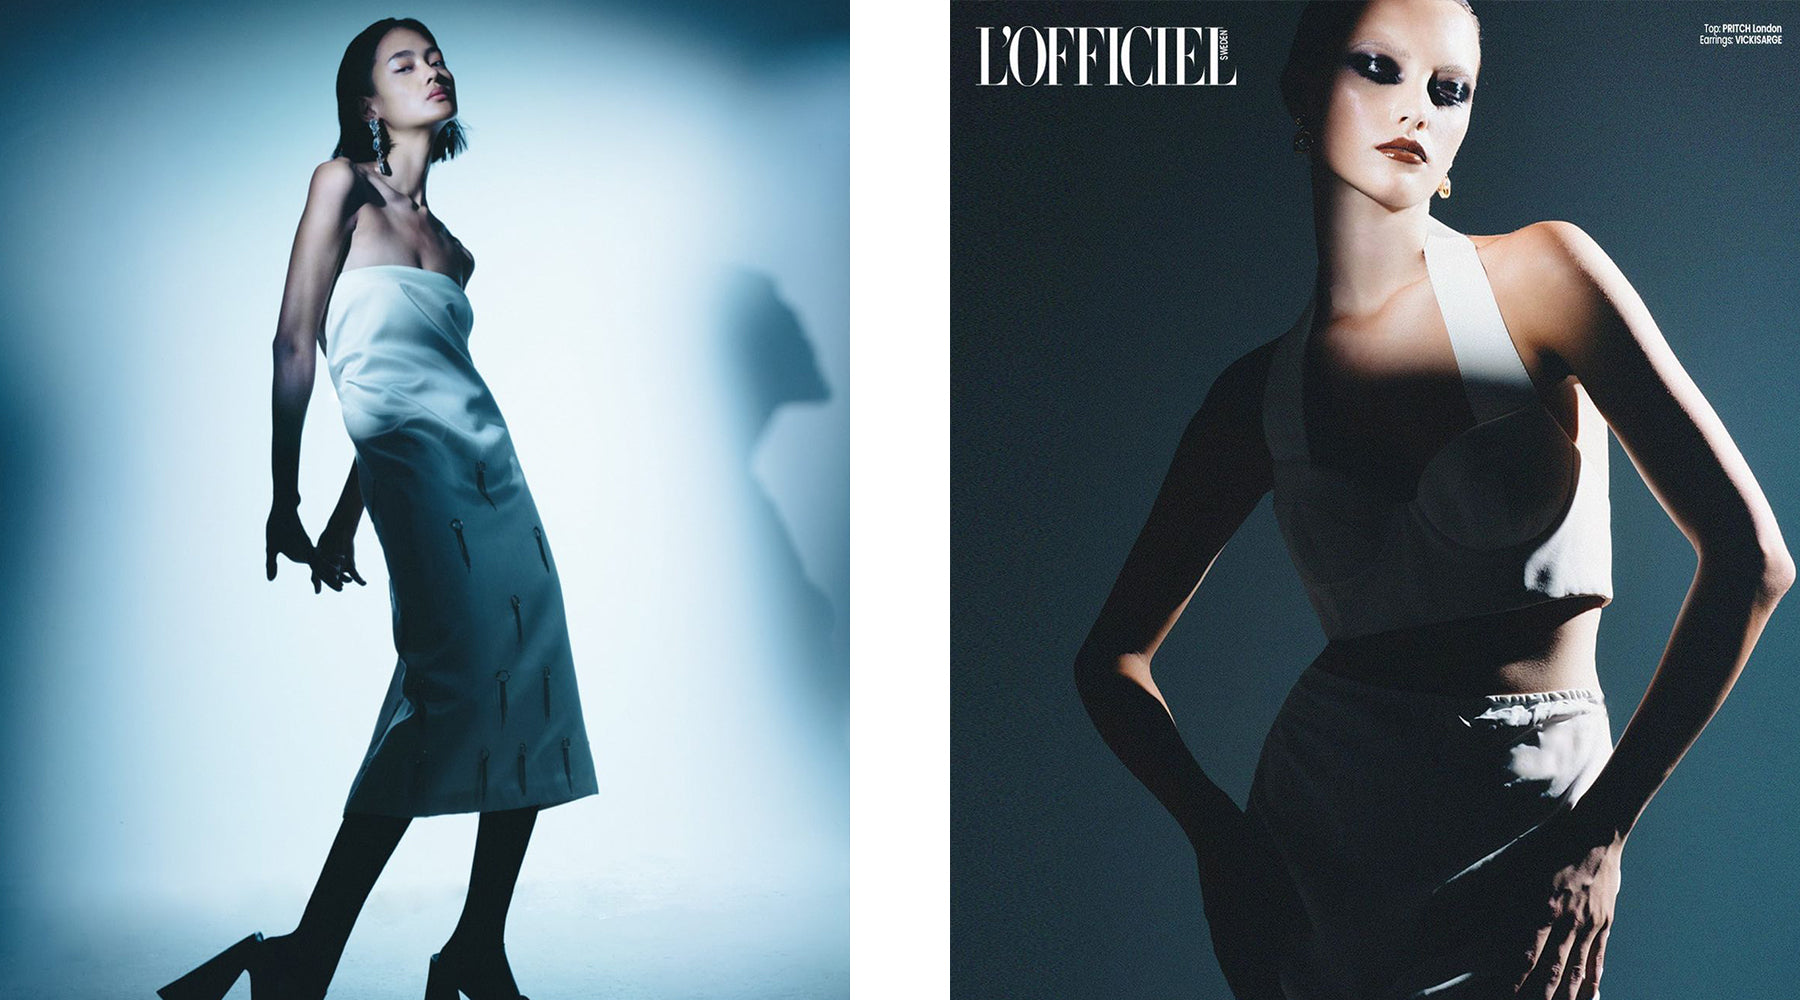 PRITCH pieces feature in L'Officiel Scandinavia cover story